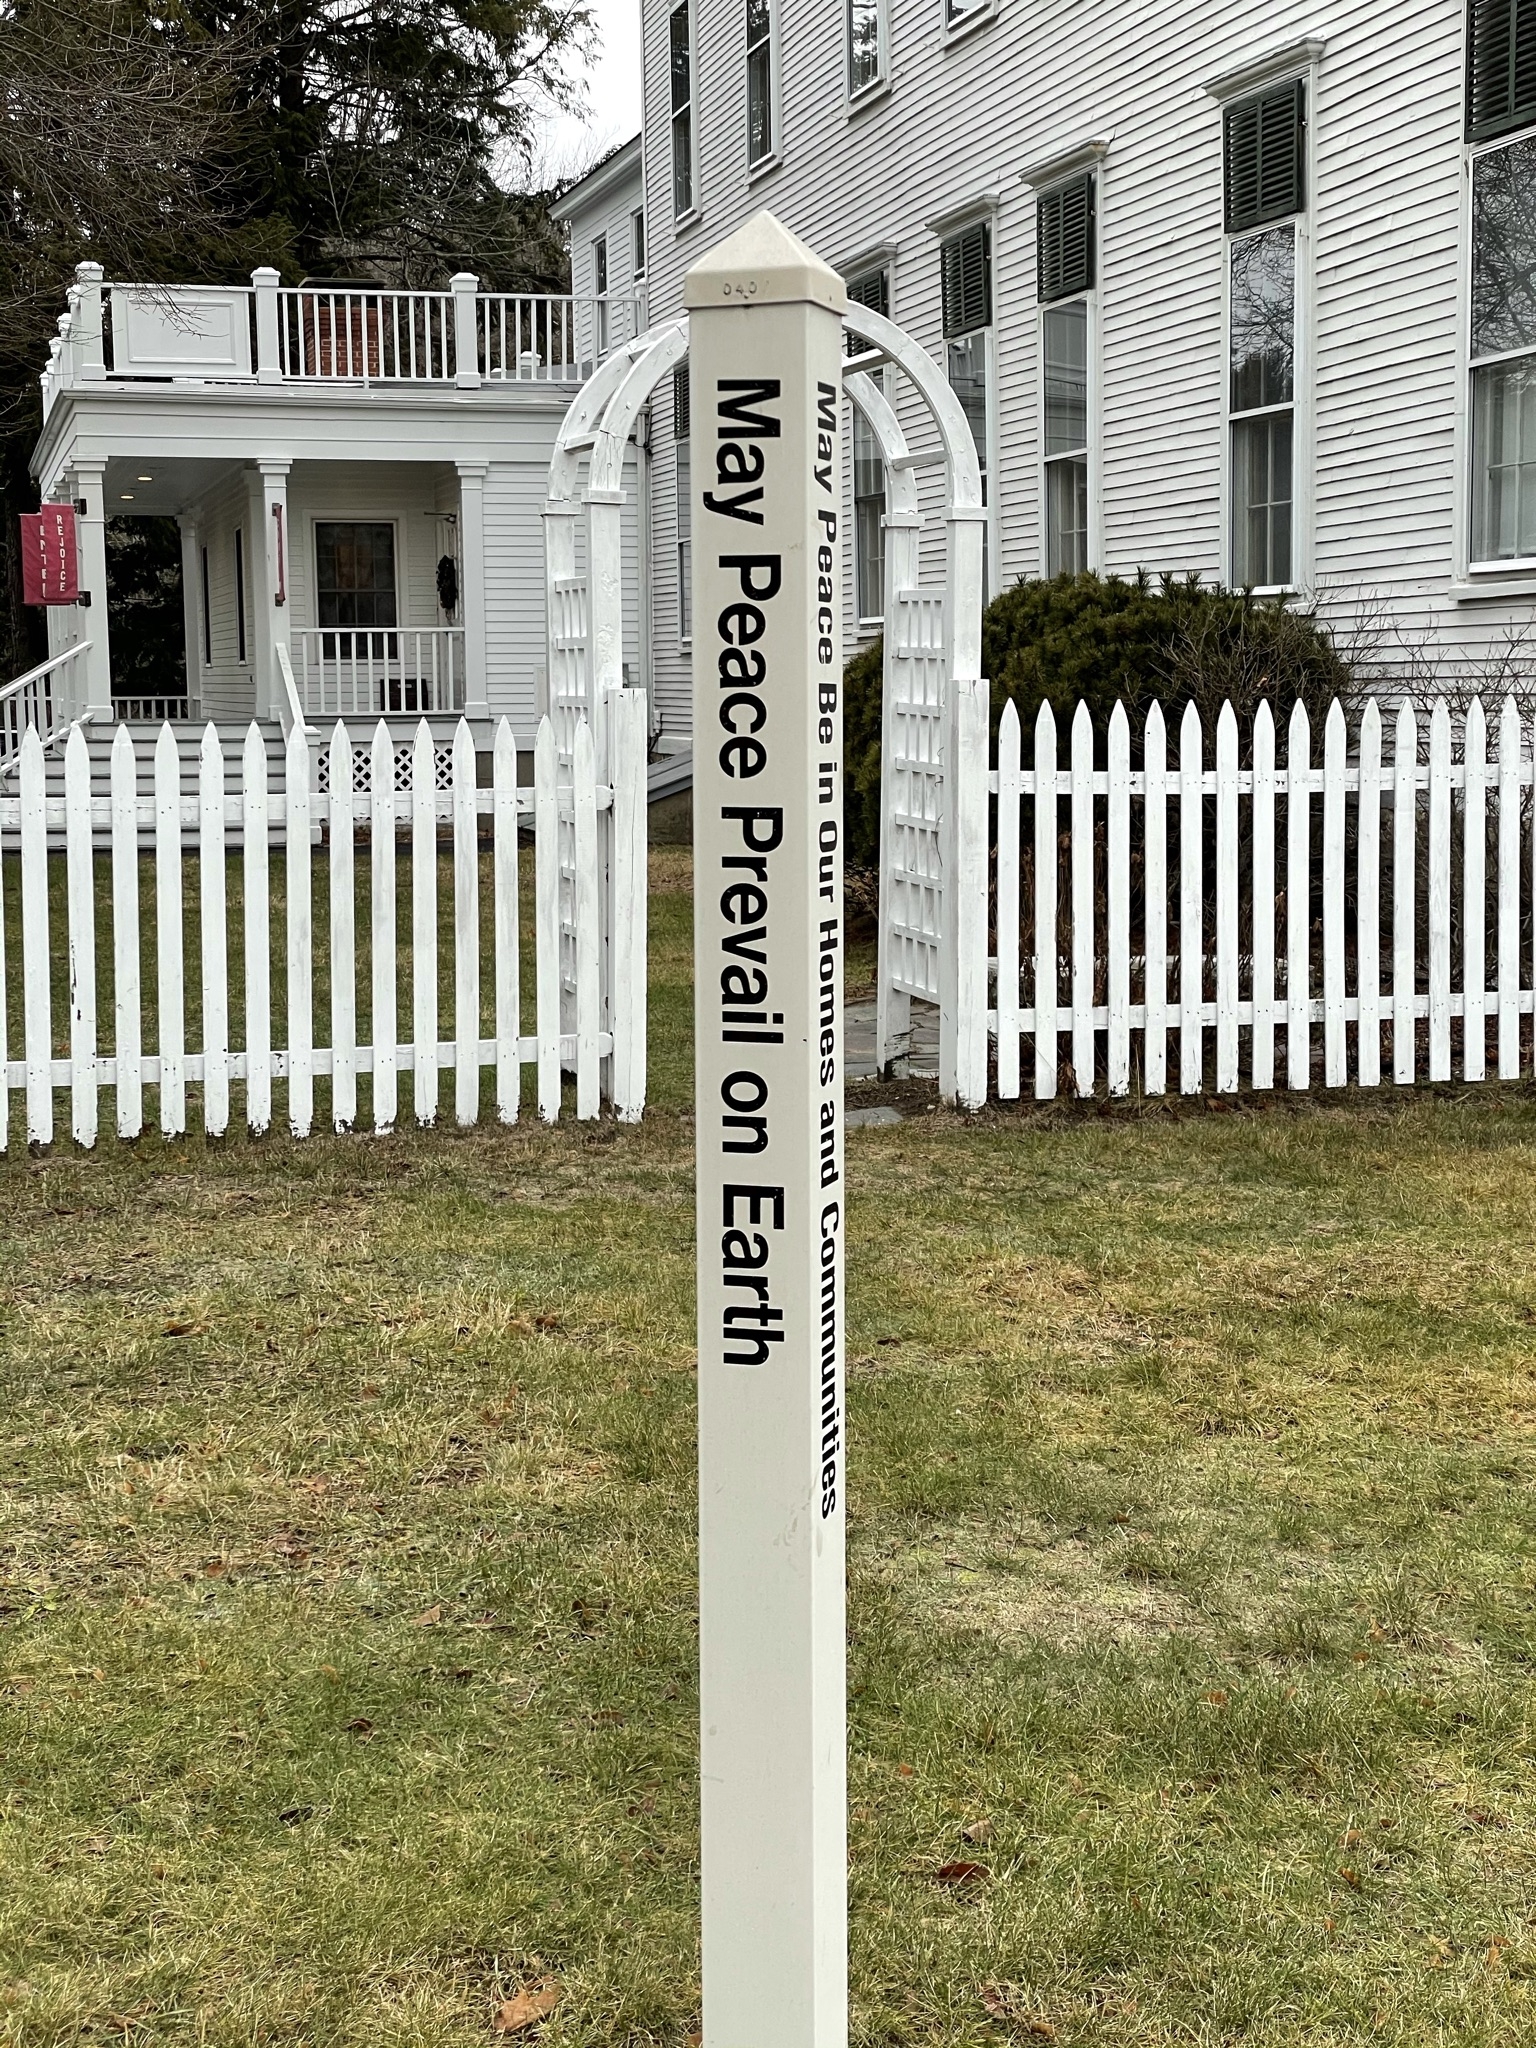 The post on the lawn which reads "May peace prevail on Earth"